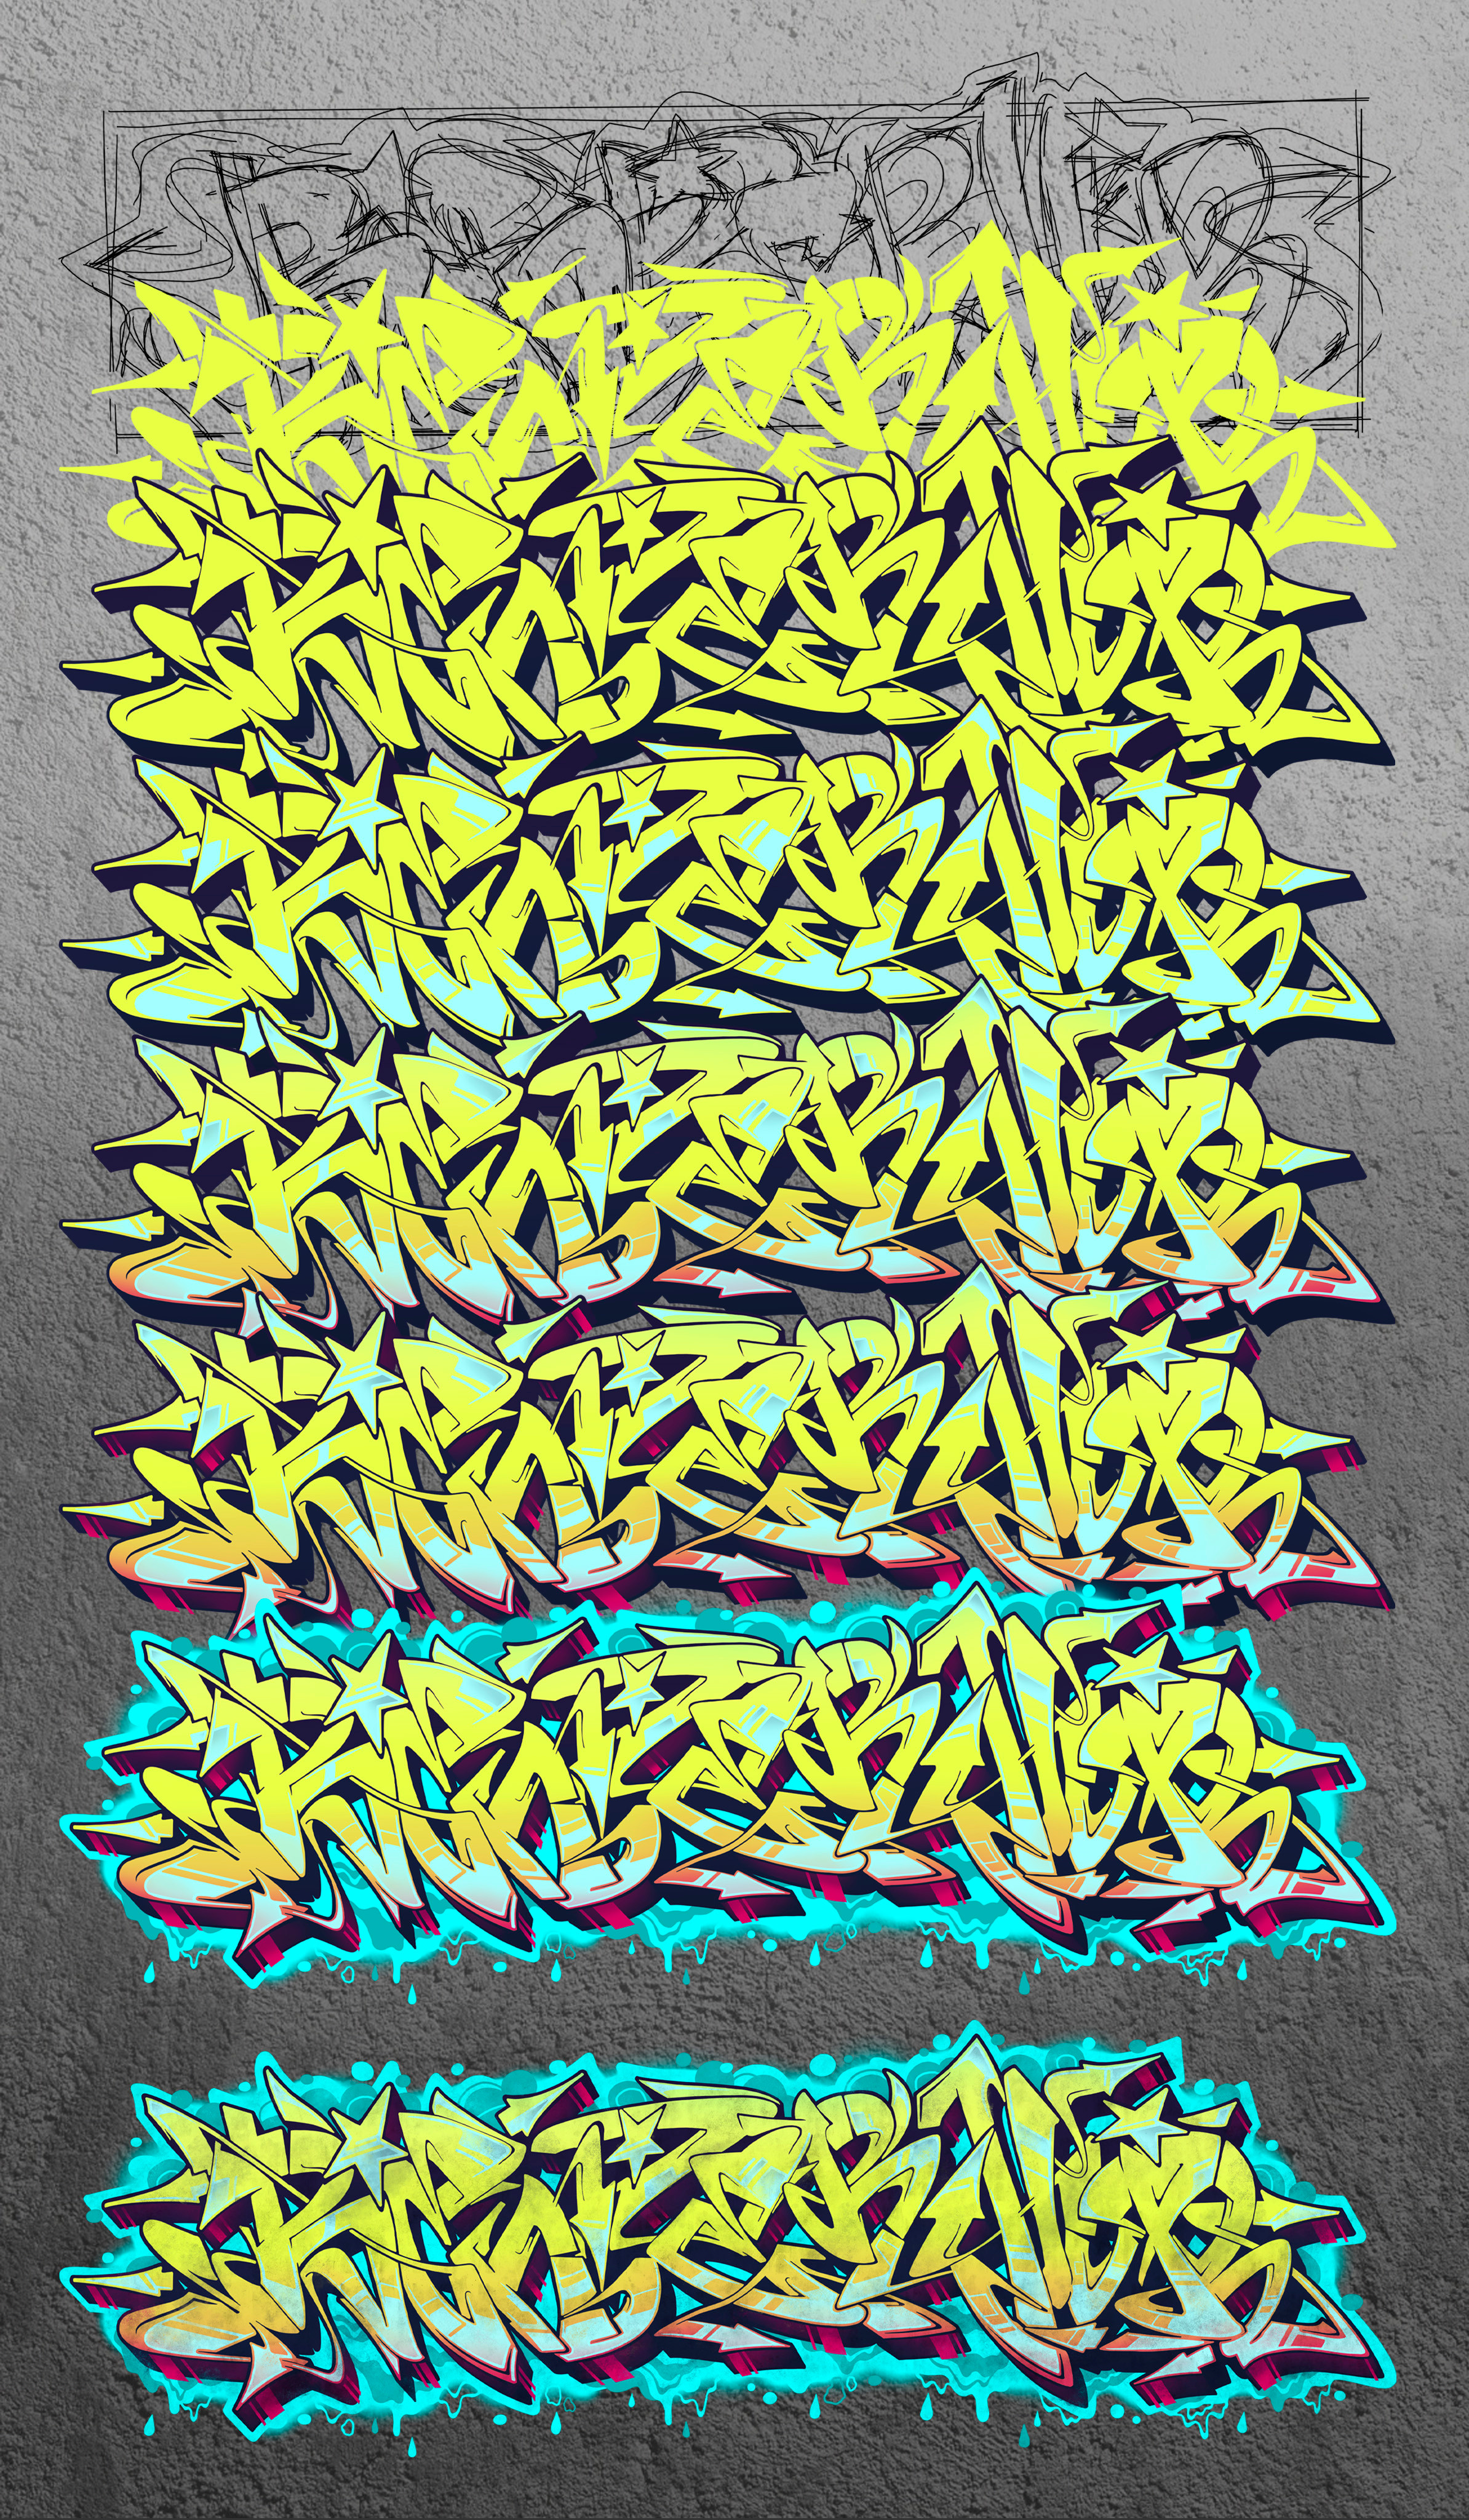 Work In Progress: Intermediate stages of work on graffiti, up to the final version.